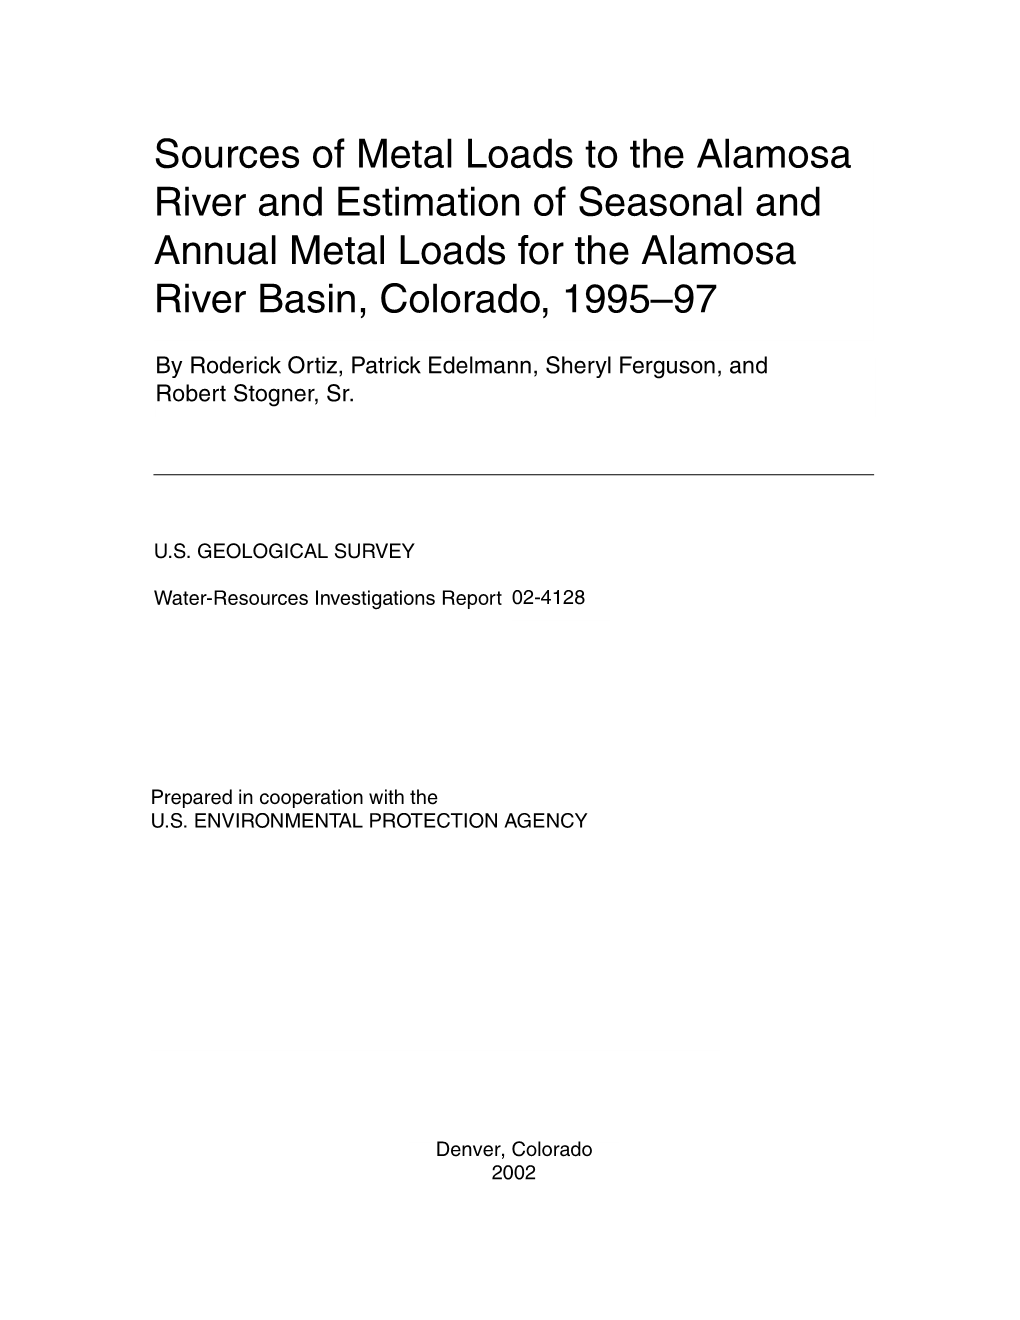 Sources of Metal Loads to the Alamosa River and Estimation of Seasonal and Annual Metal Loads for the Alamosa River Basin, Colorado, 1995–97